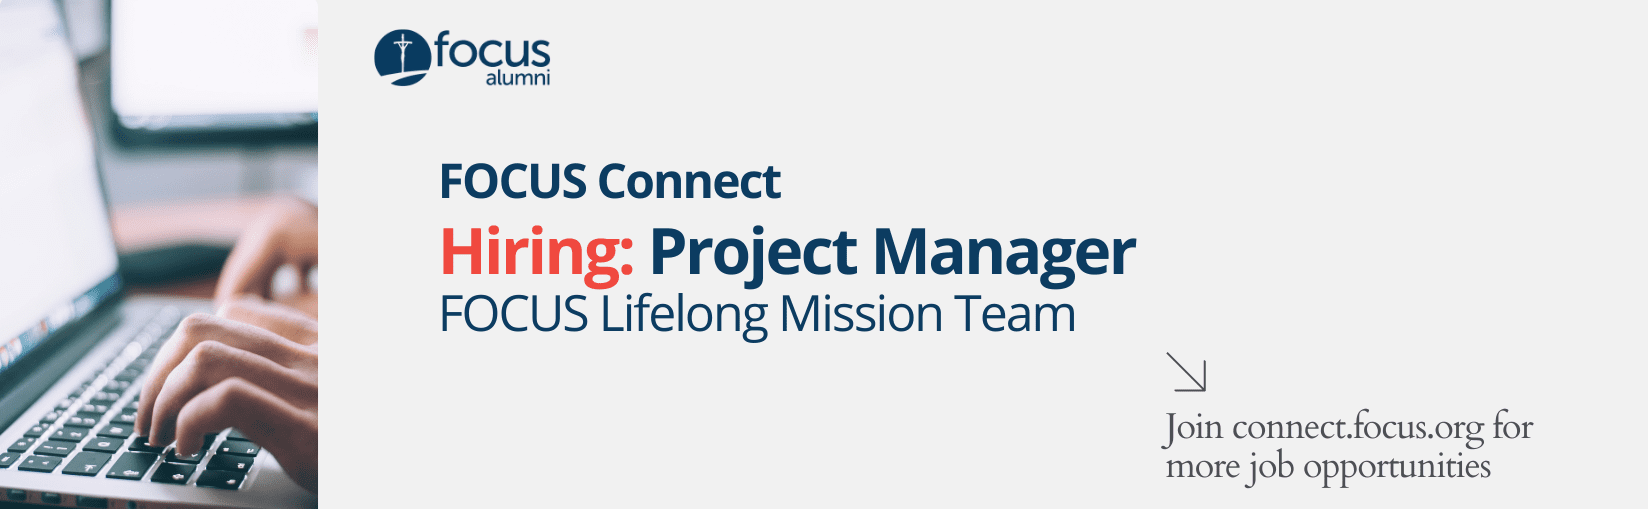 focus connect hiring project manager